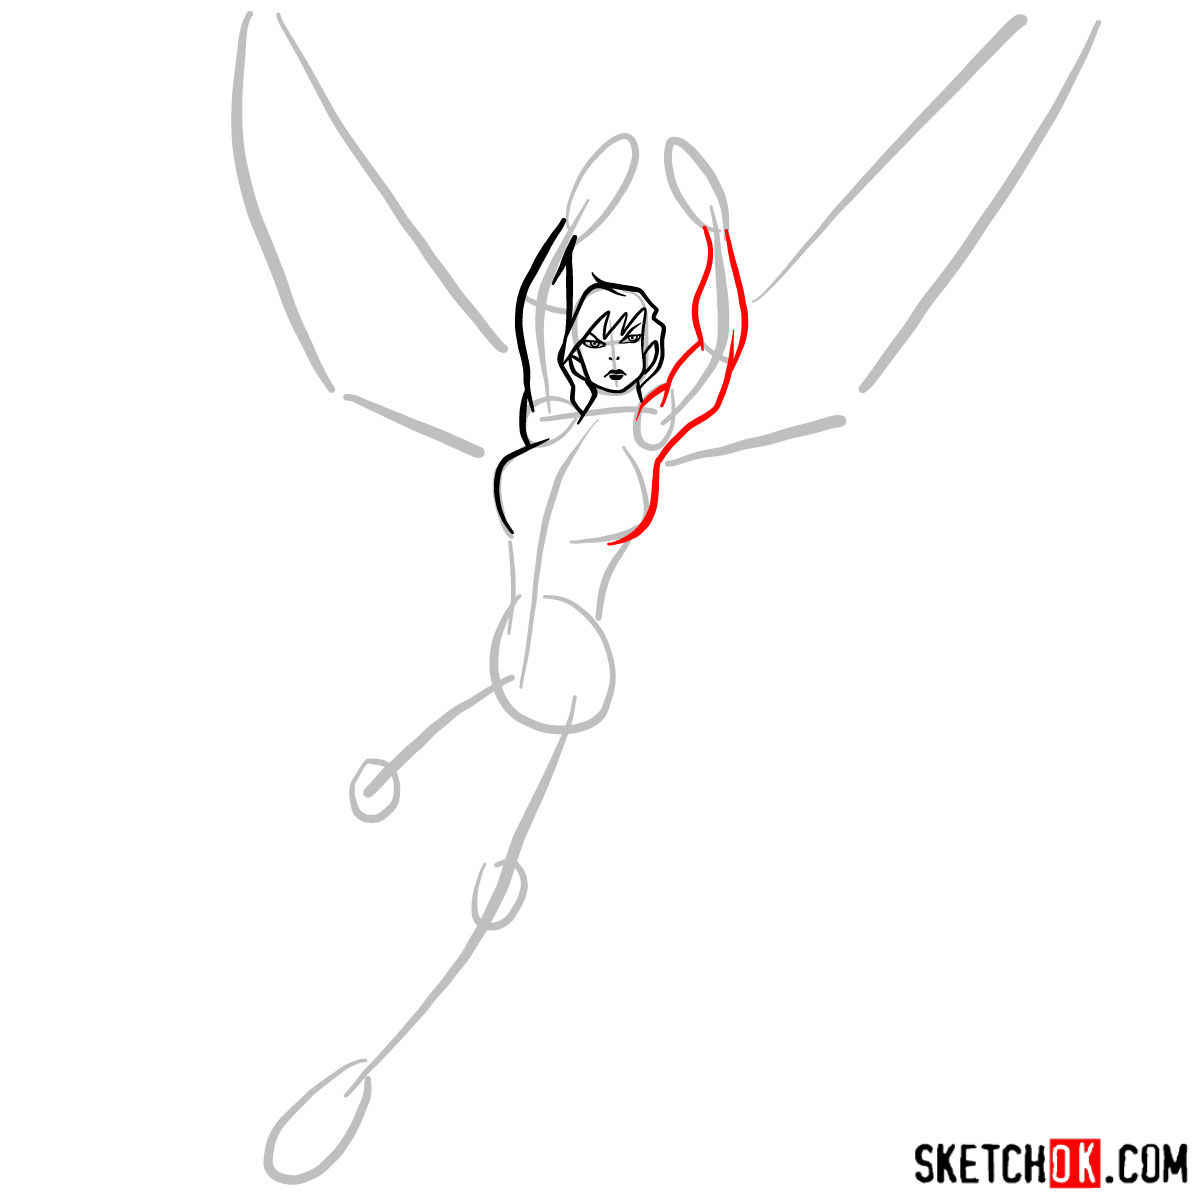 How to draw Wasp, Janet van Dyne from Marvel Comics - step 05